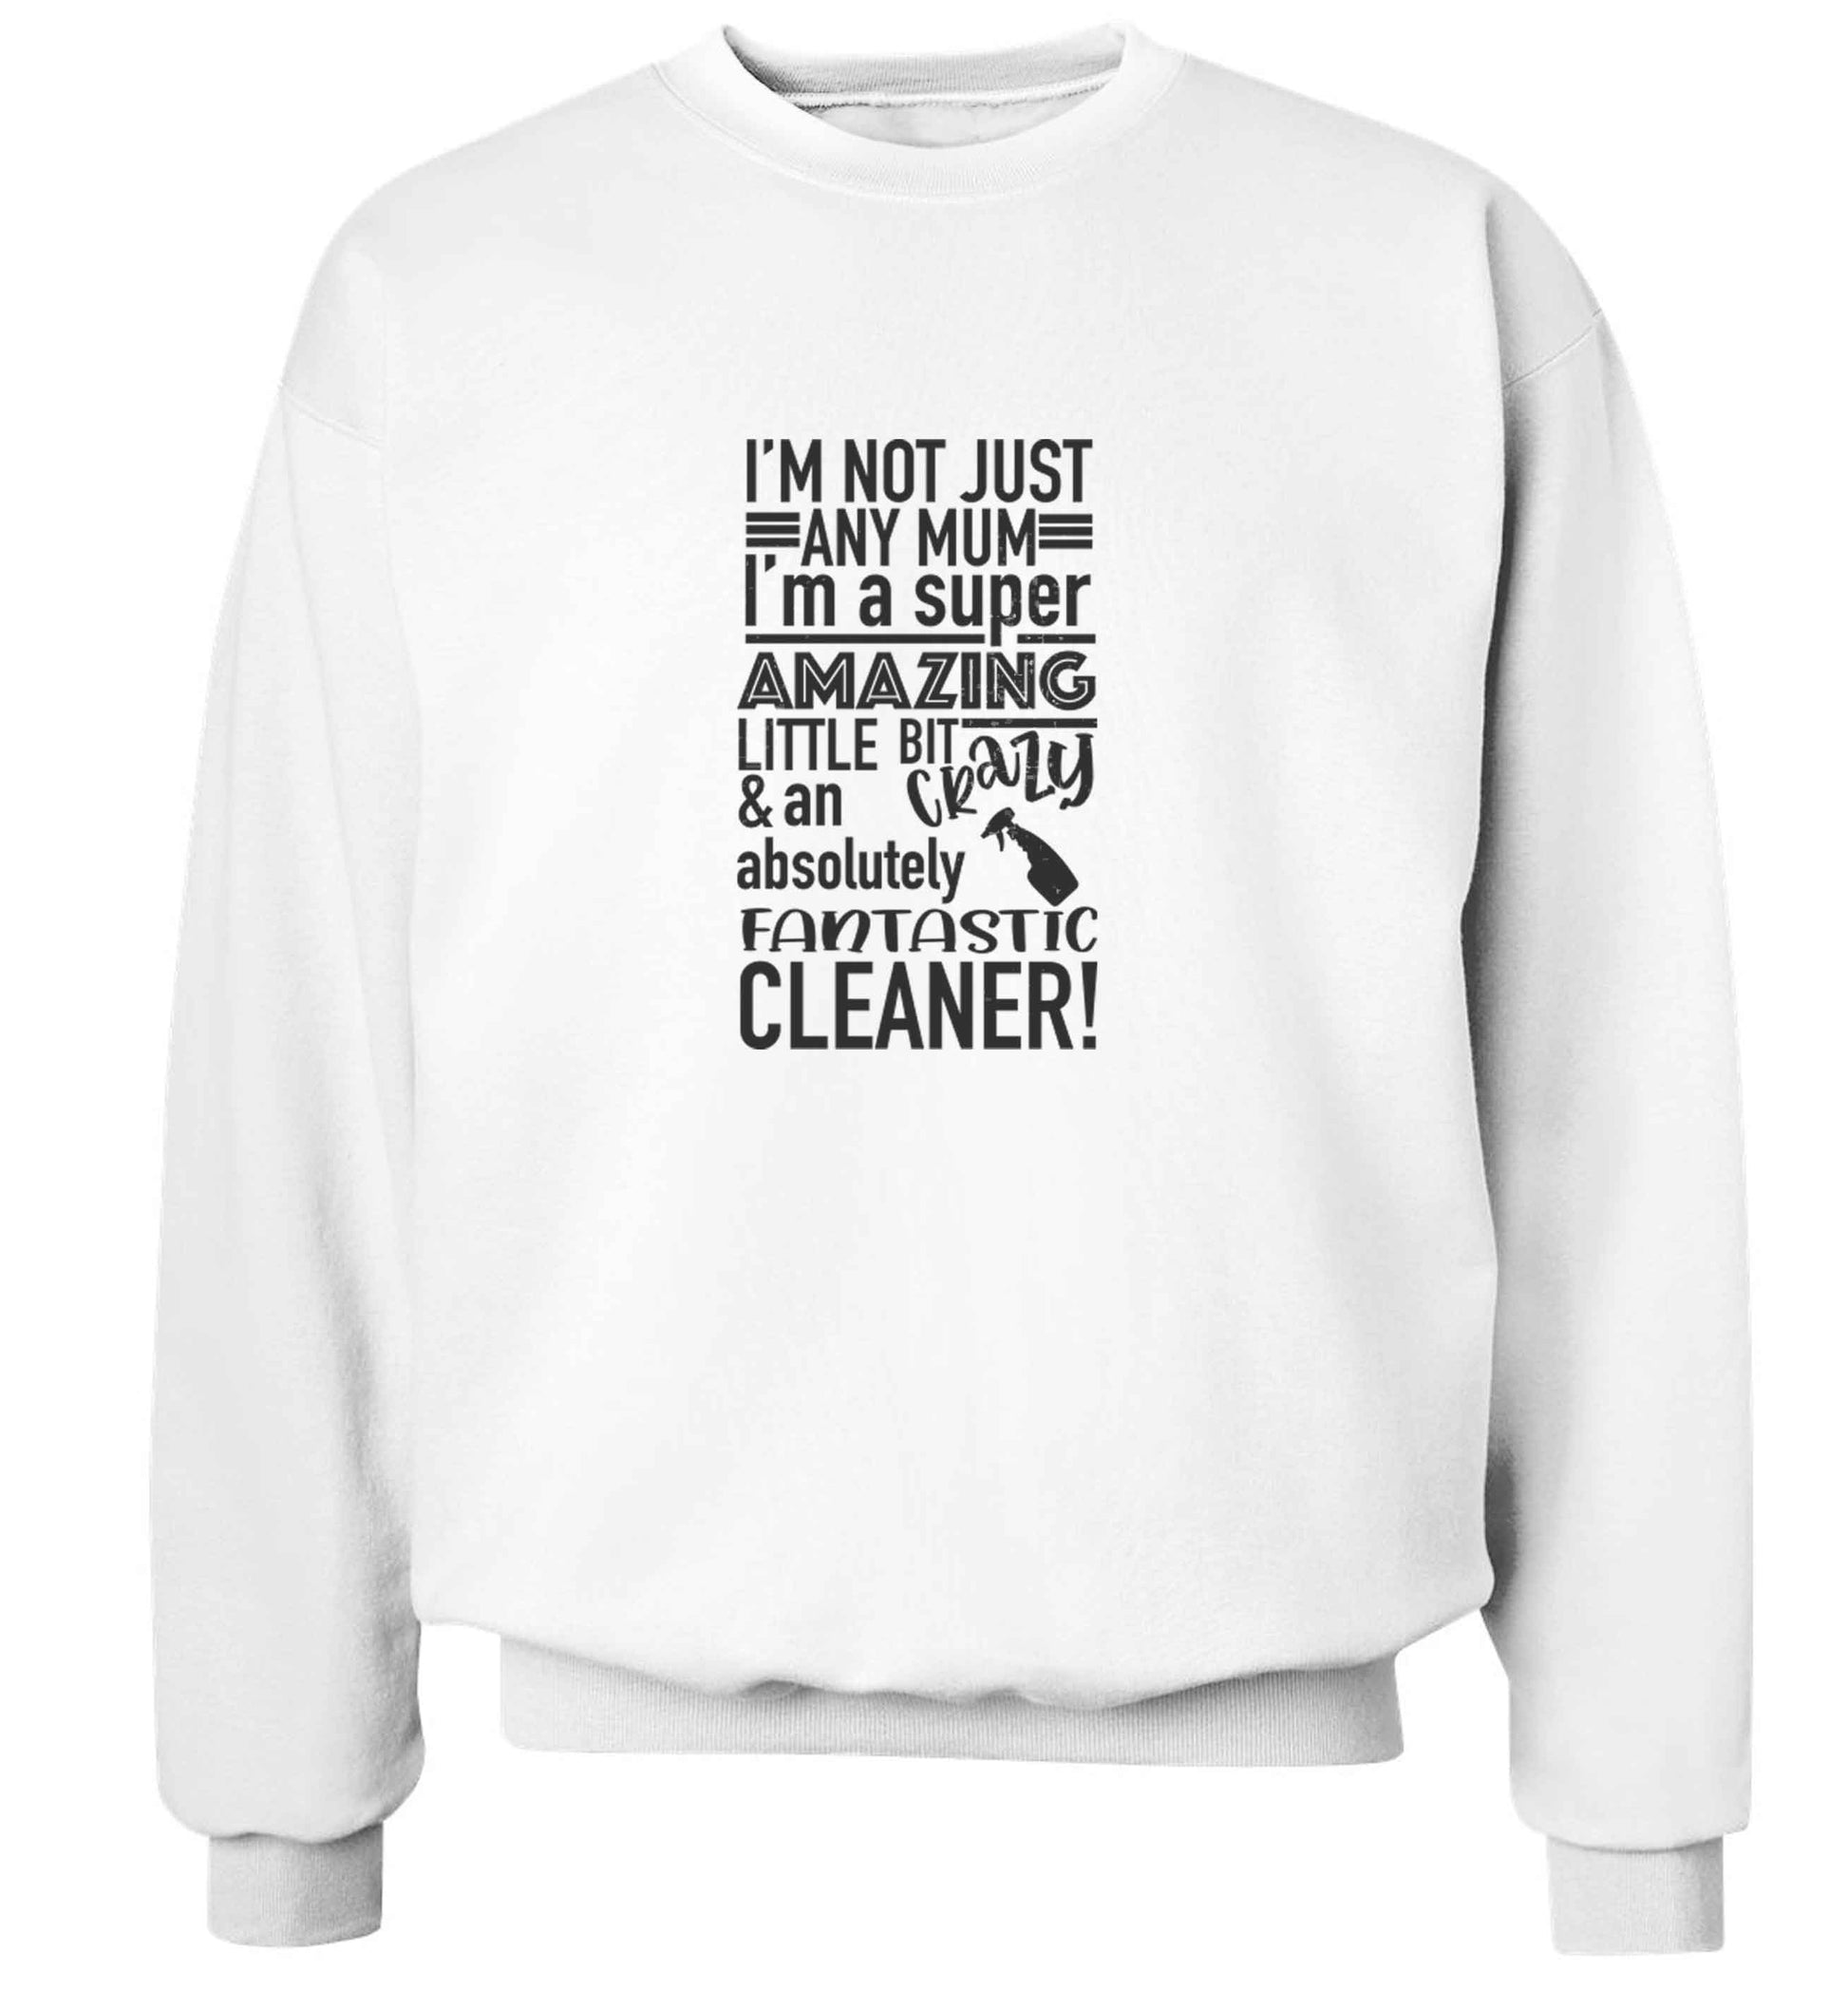 I'm not just any mum I'm a super amazing little bit crazy and an absolutely fantastic cleaner! adult's unisex white sweater 2XL